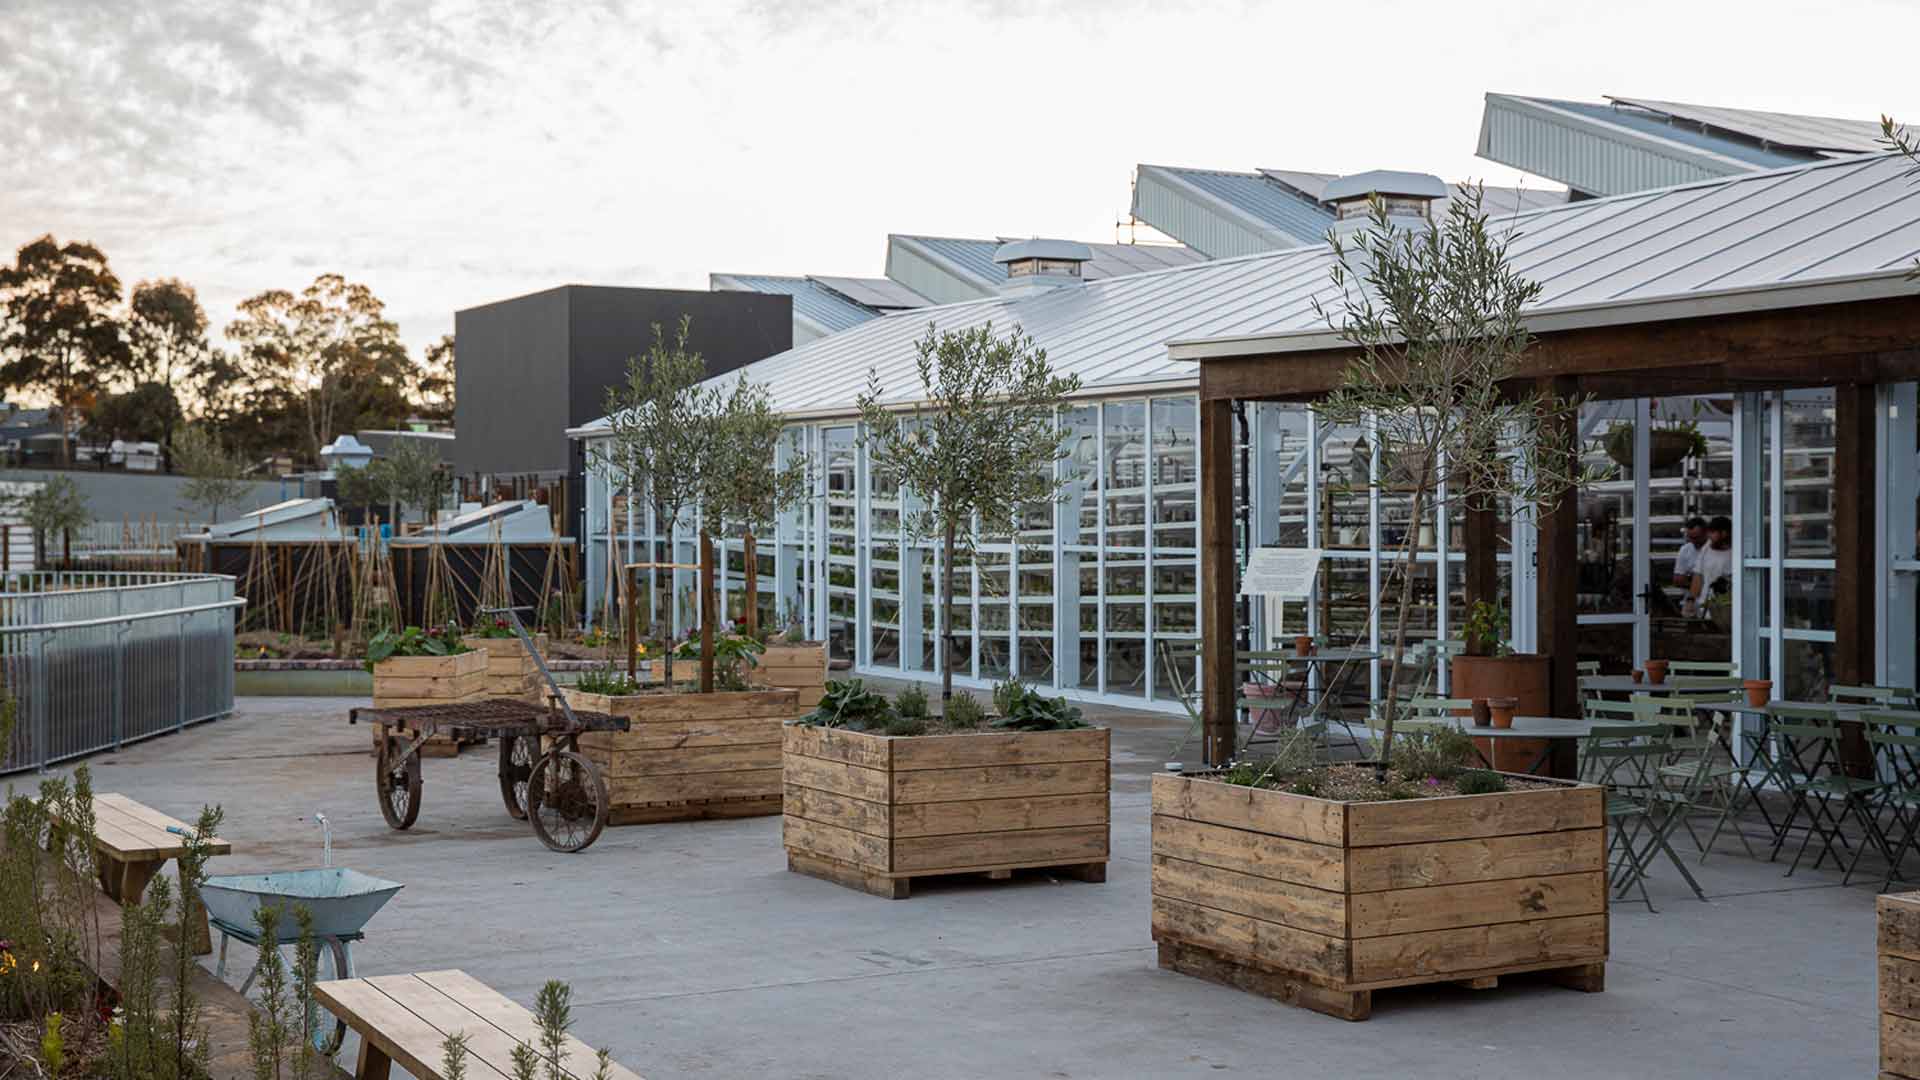 Acre Eatery and Its 2000-Square-Metre Urban Farm Are Now Open on a Shopping Centre Rooftop